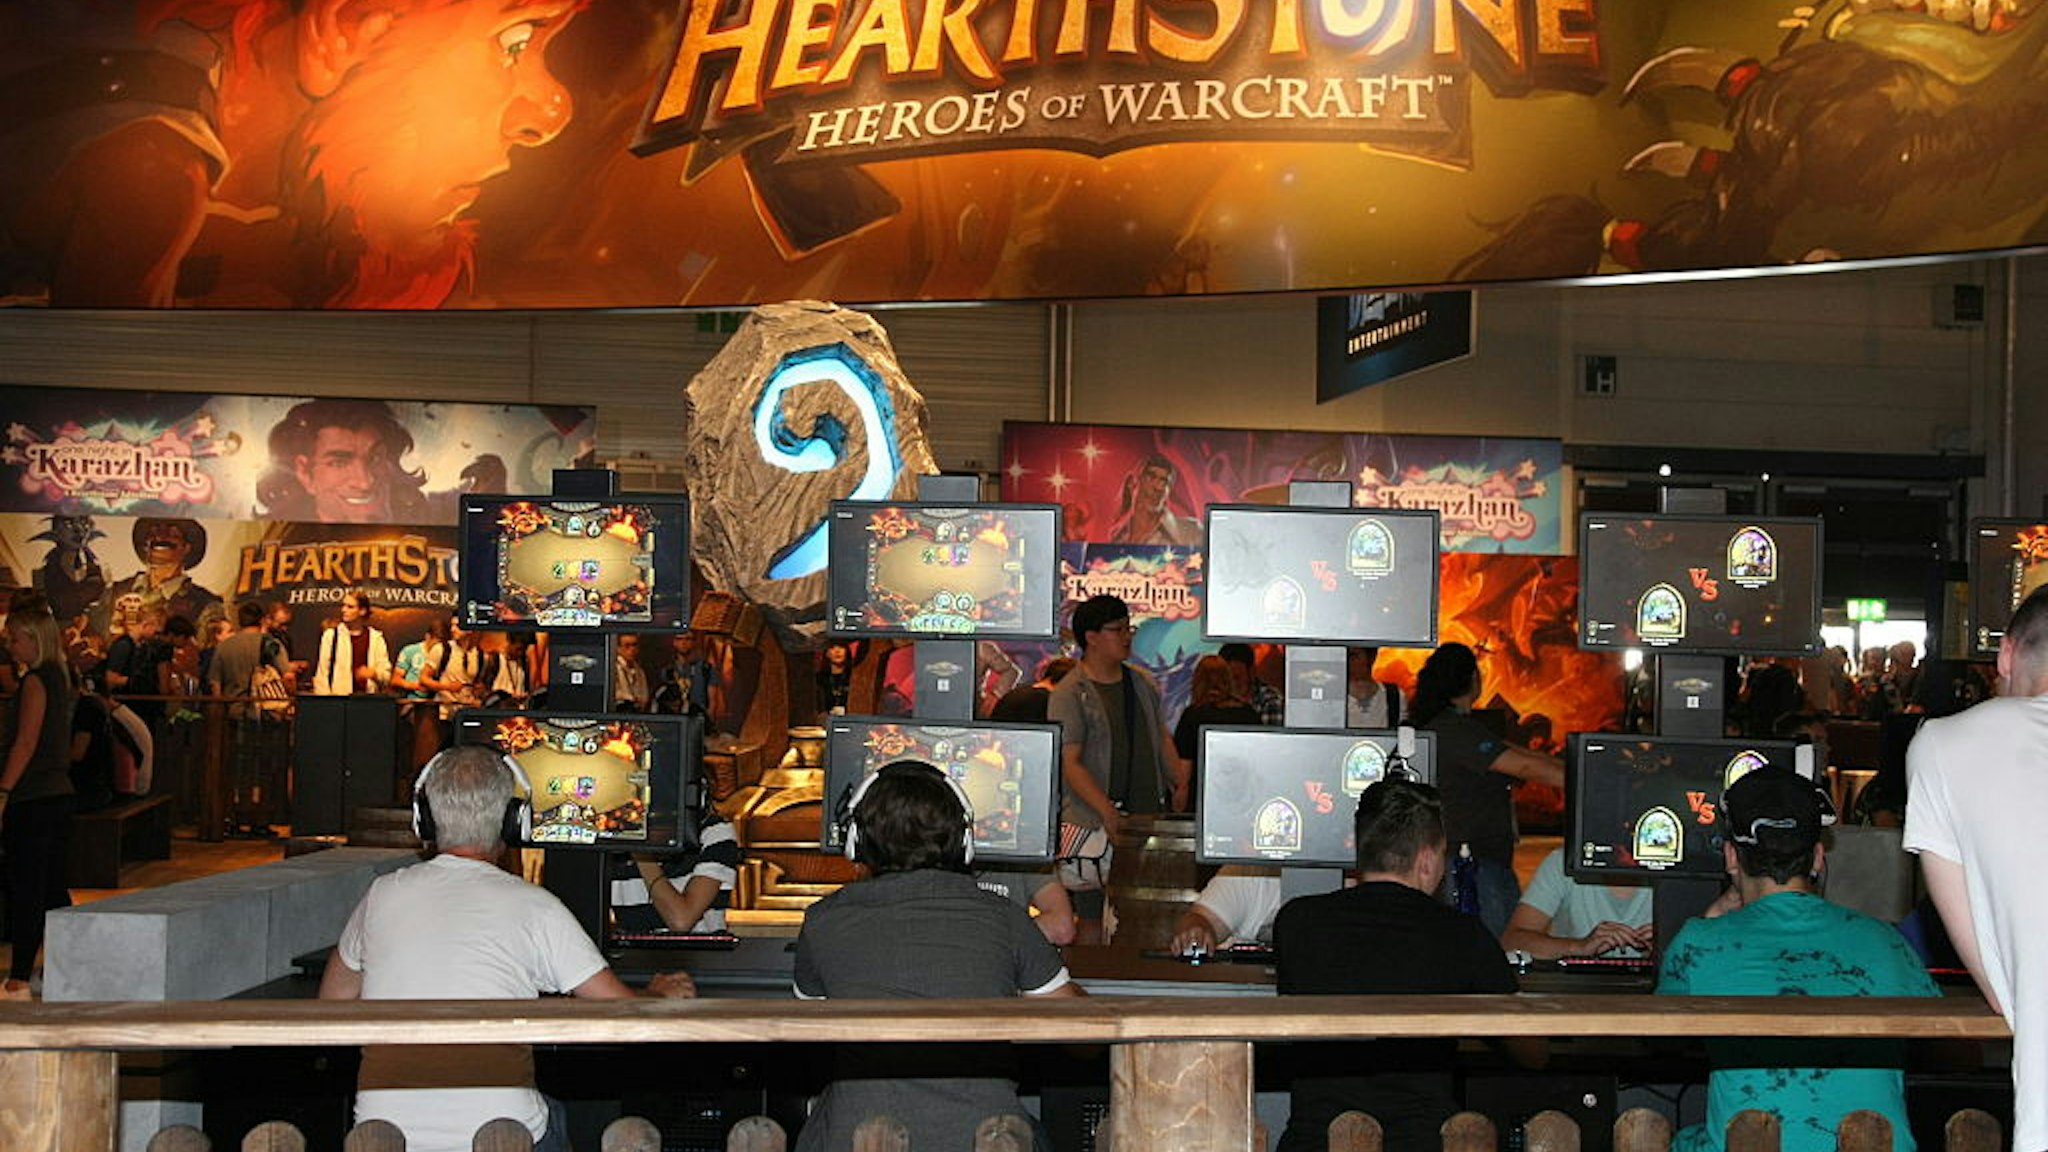 Visitors playing the Game Hearthstone Heroes of Warcraft at the Gamescom fair. Gamescom the Worlds largest Gaming Fair.